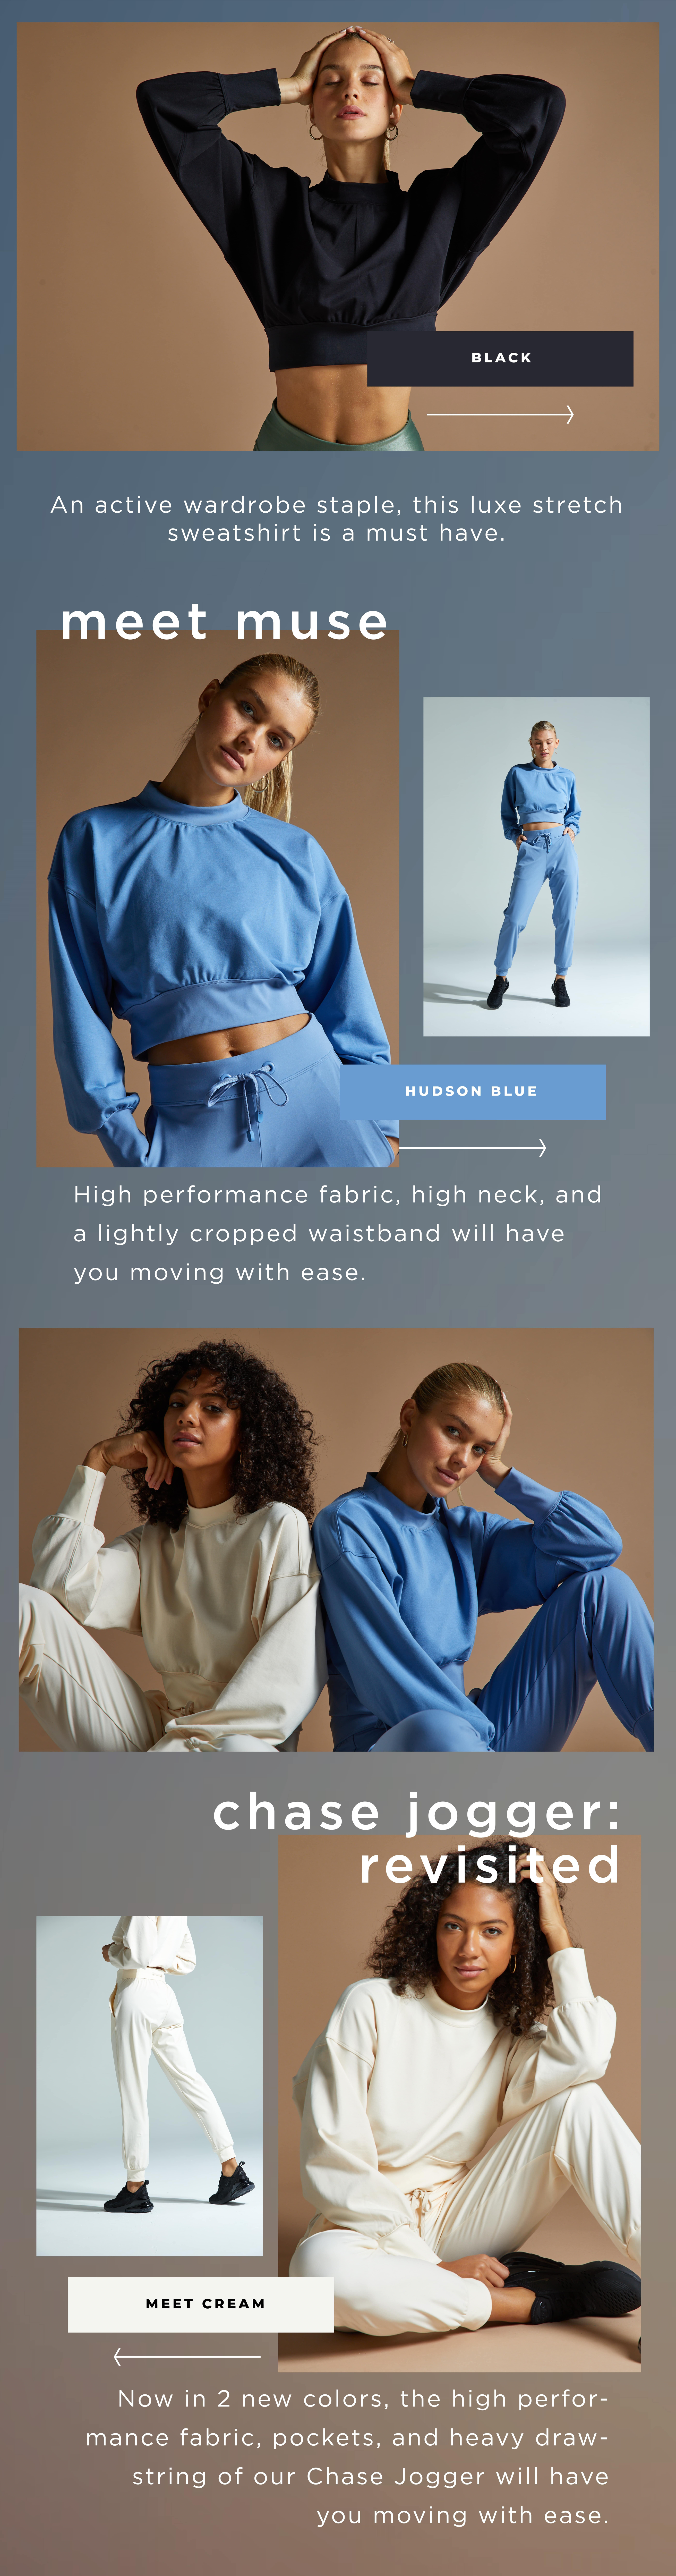 meet muse and revisit the chase jogger in new hues: Hudson blue and cream